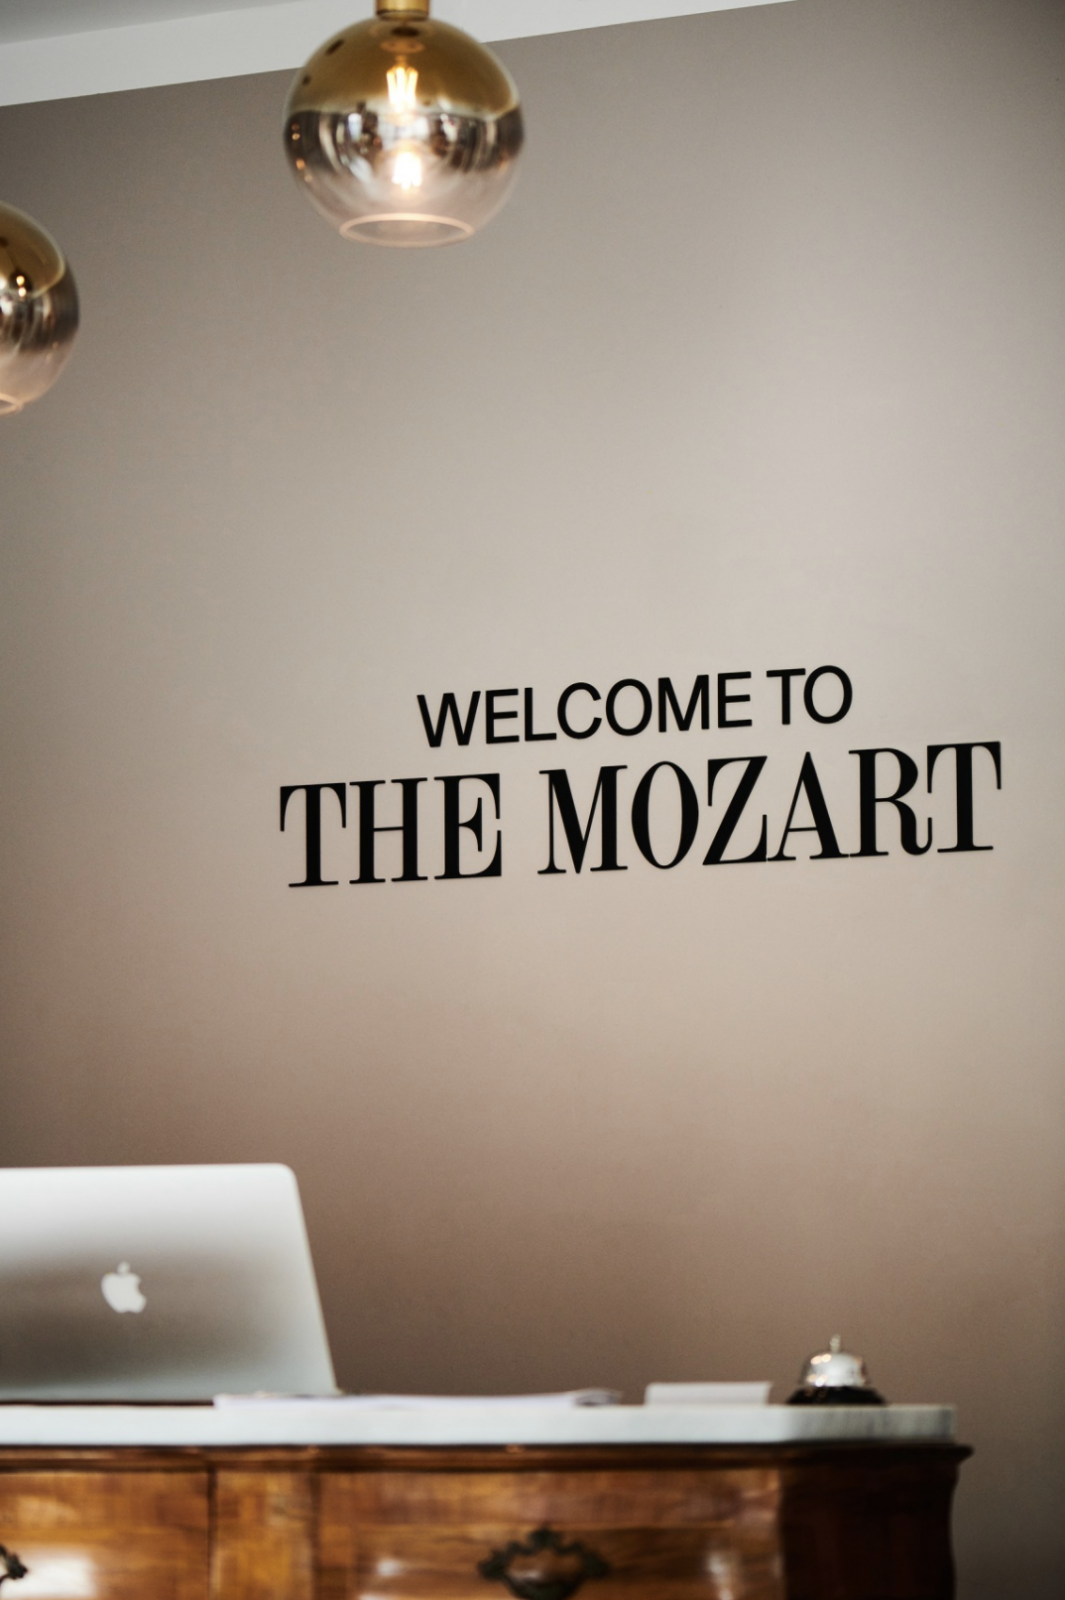 The Mozart Hotel Branding Combines Classical Notes with Contemporary Flair